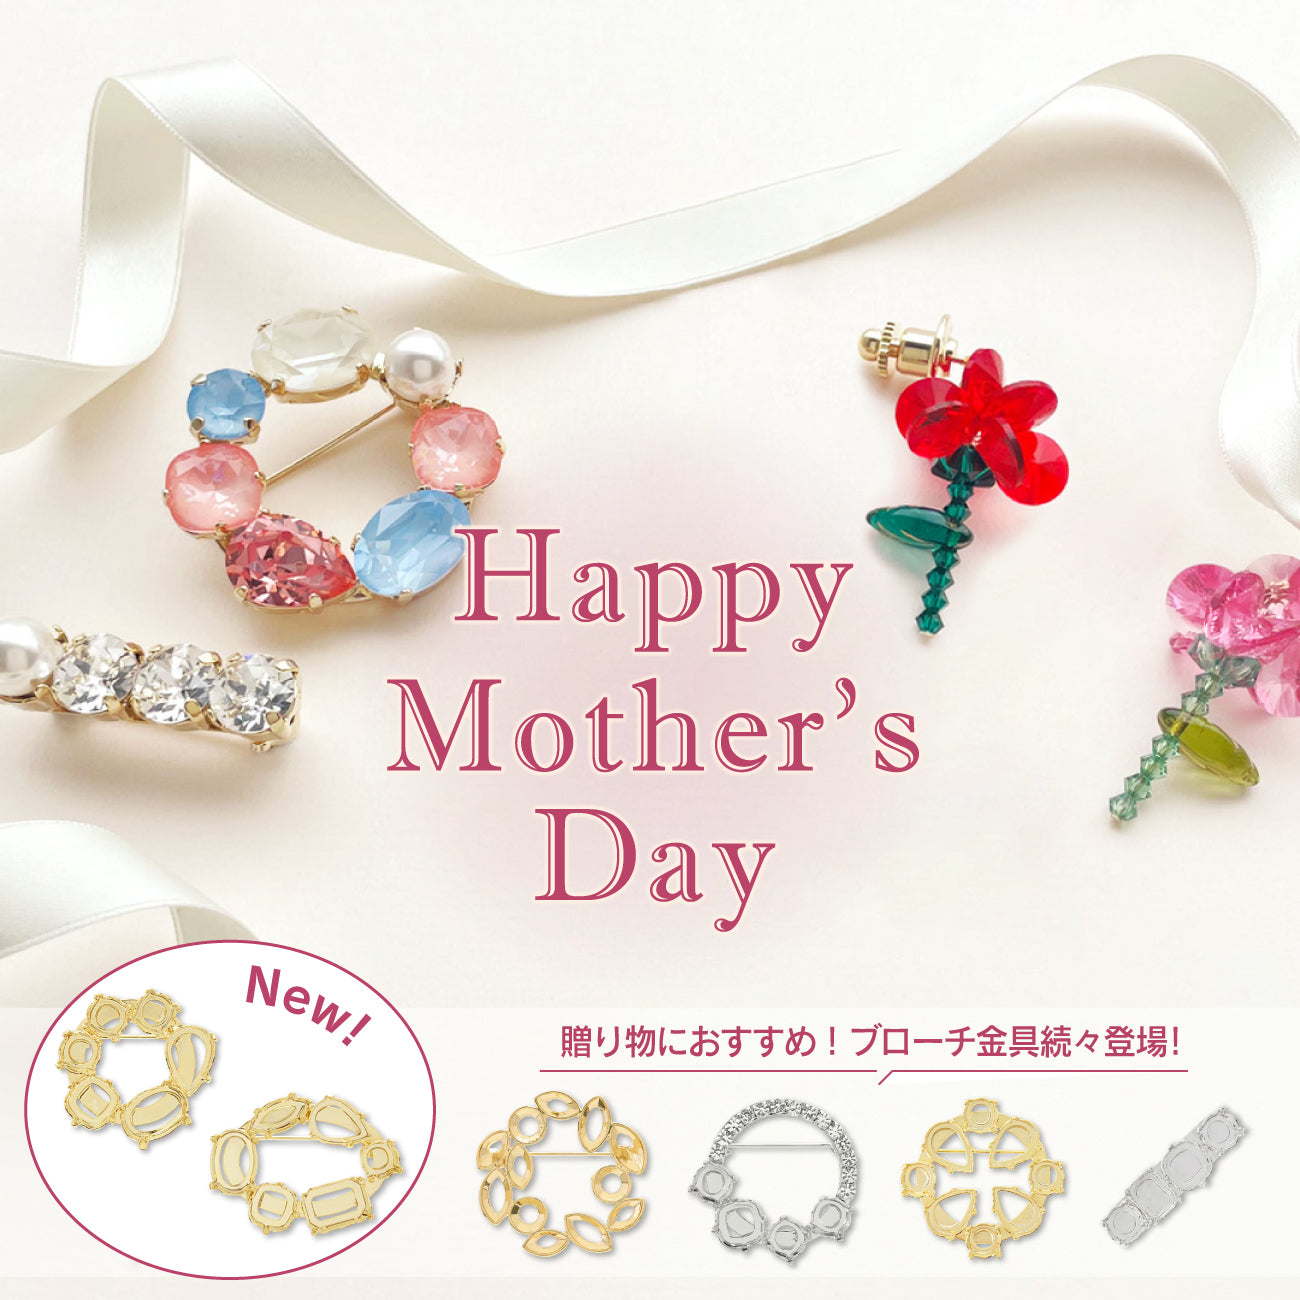 Happy Mother's Day 母の日に贈る貴和クリスタルのジュエリー